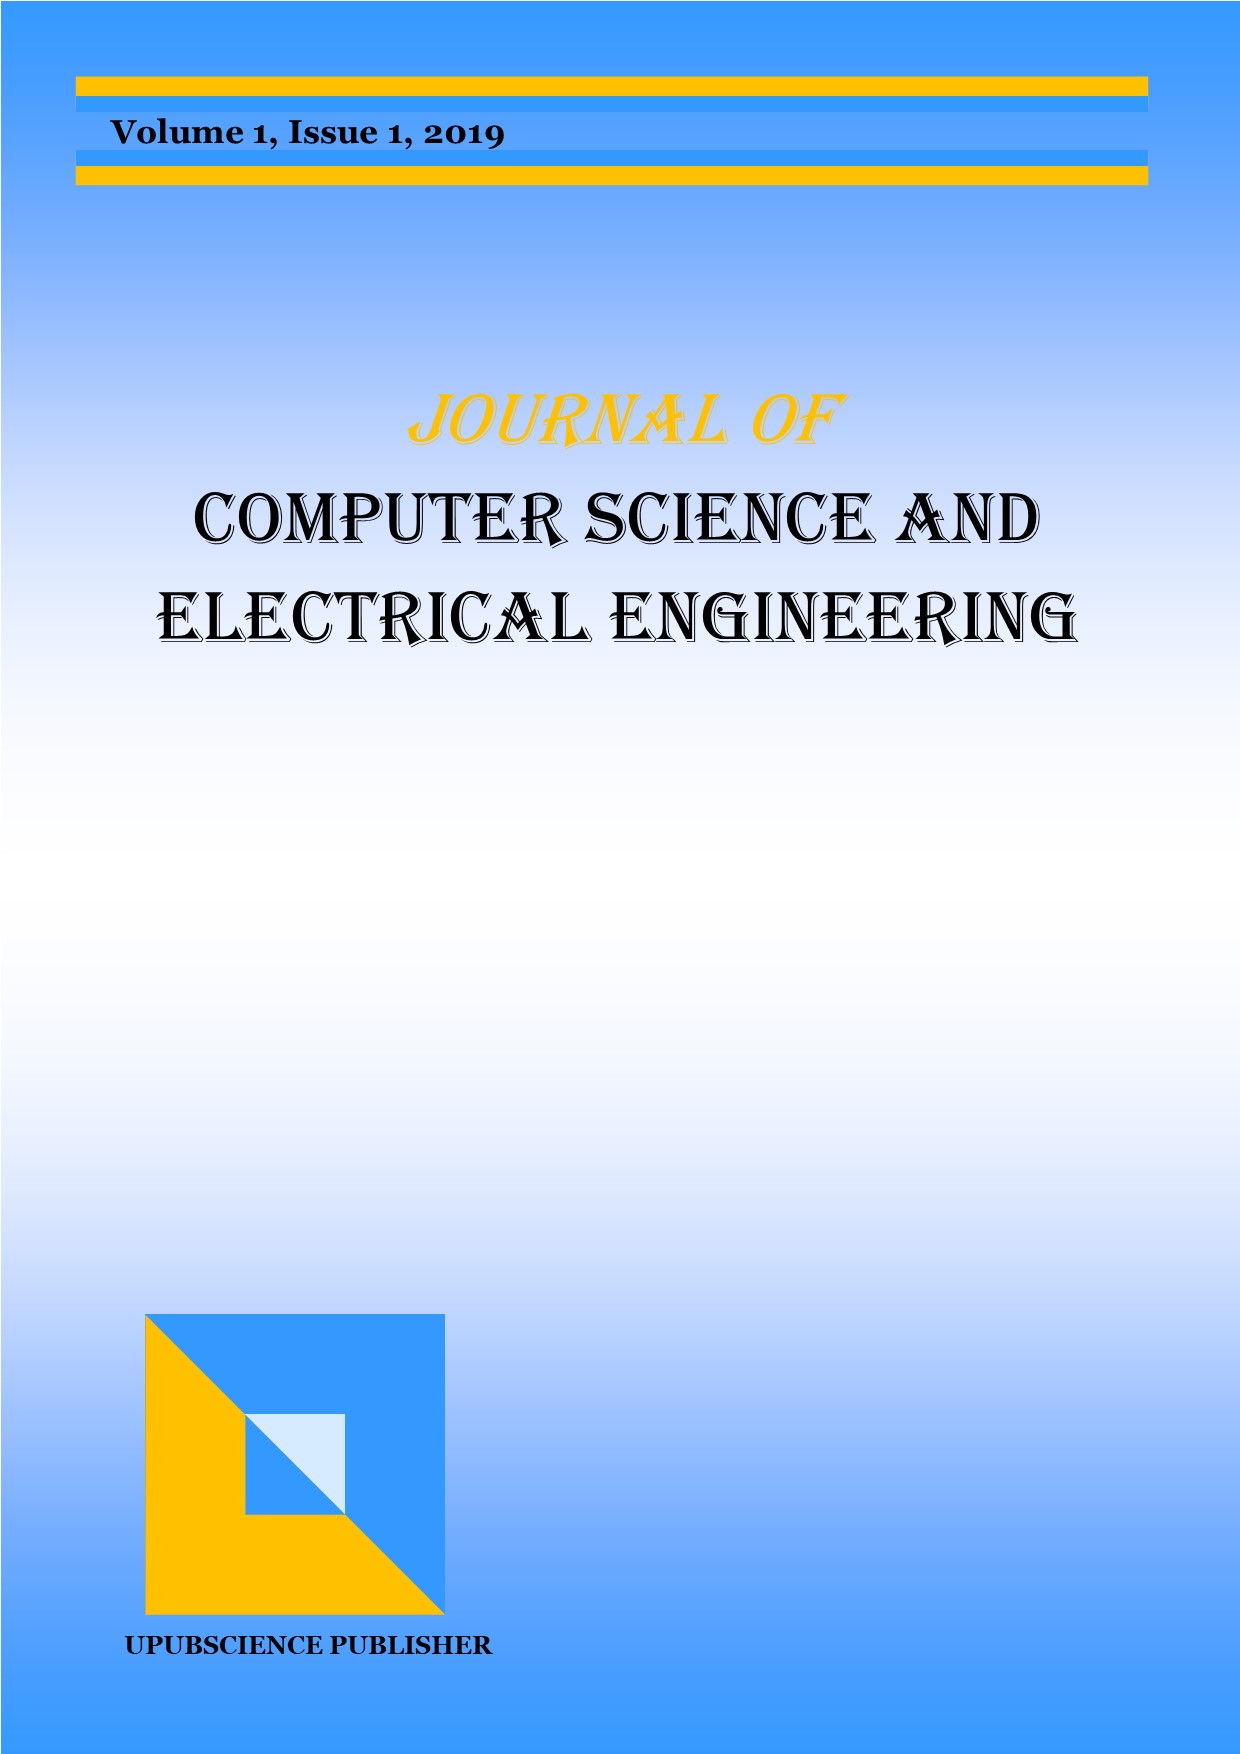  Journal of Computer Science and Electrical Engineering